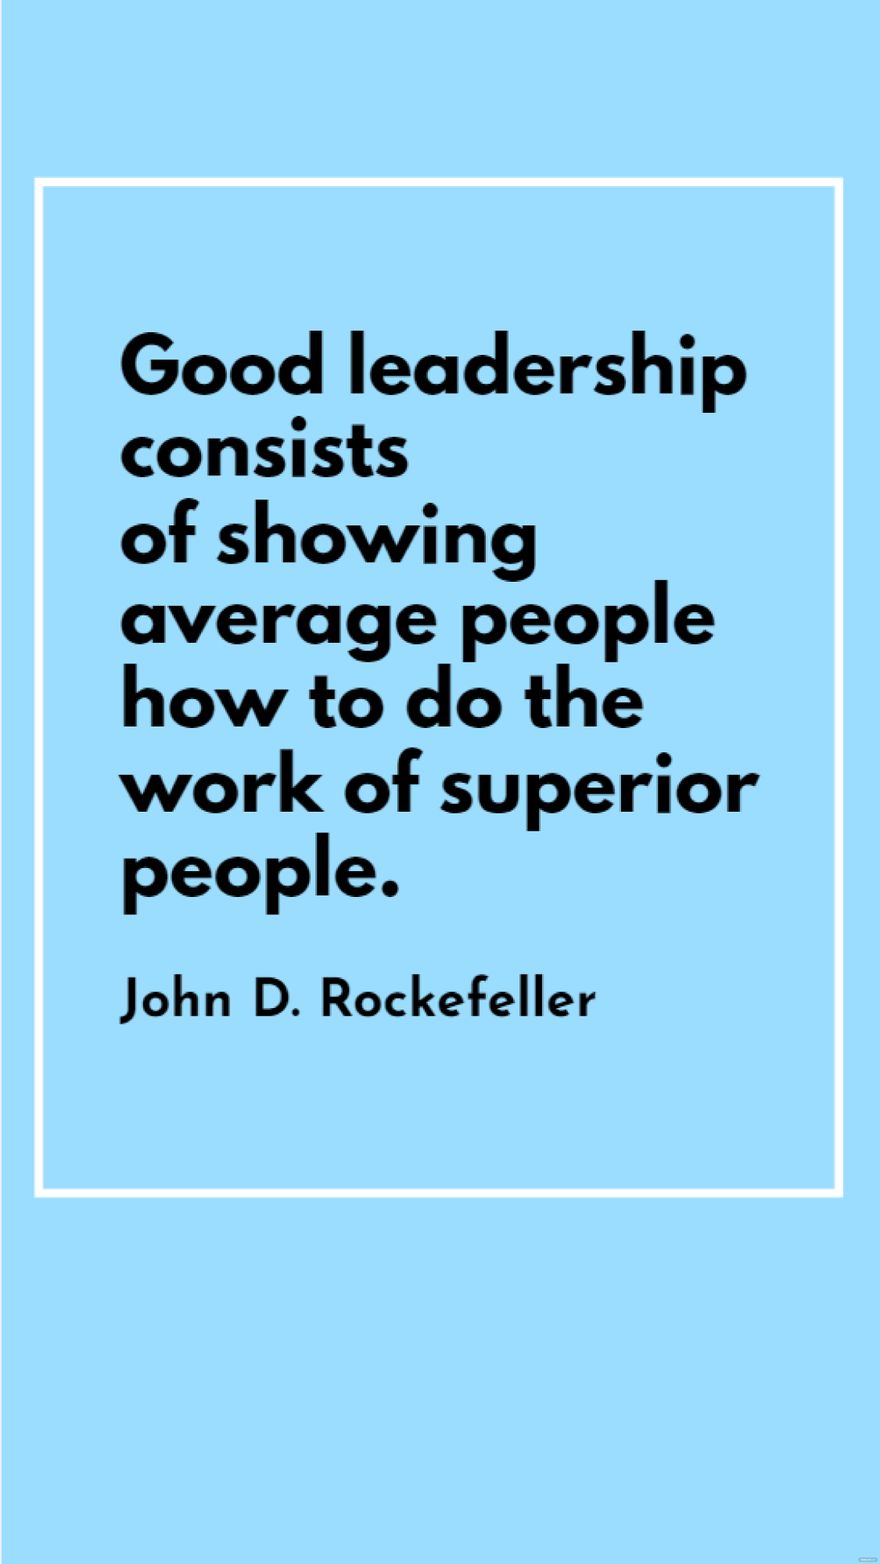 Free John D. Rockefeller - Good leadership consists of showing average people how to do the work of superior people. in JPG